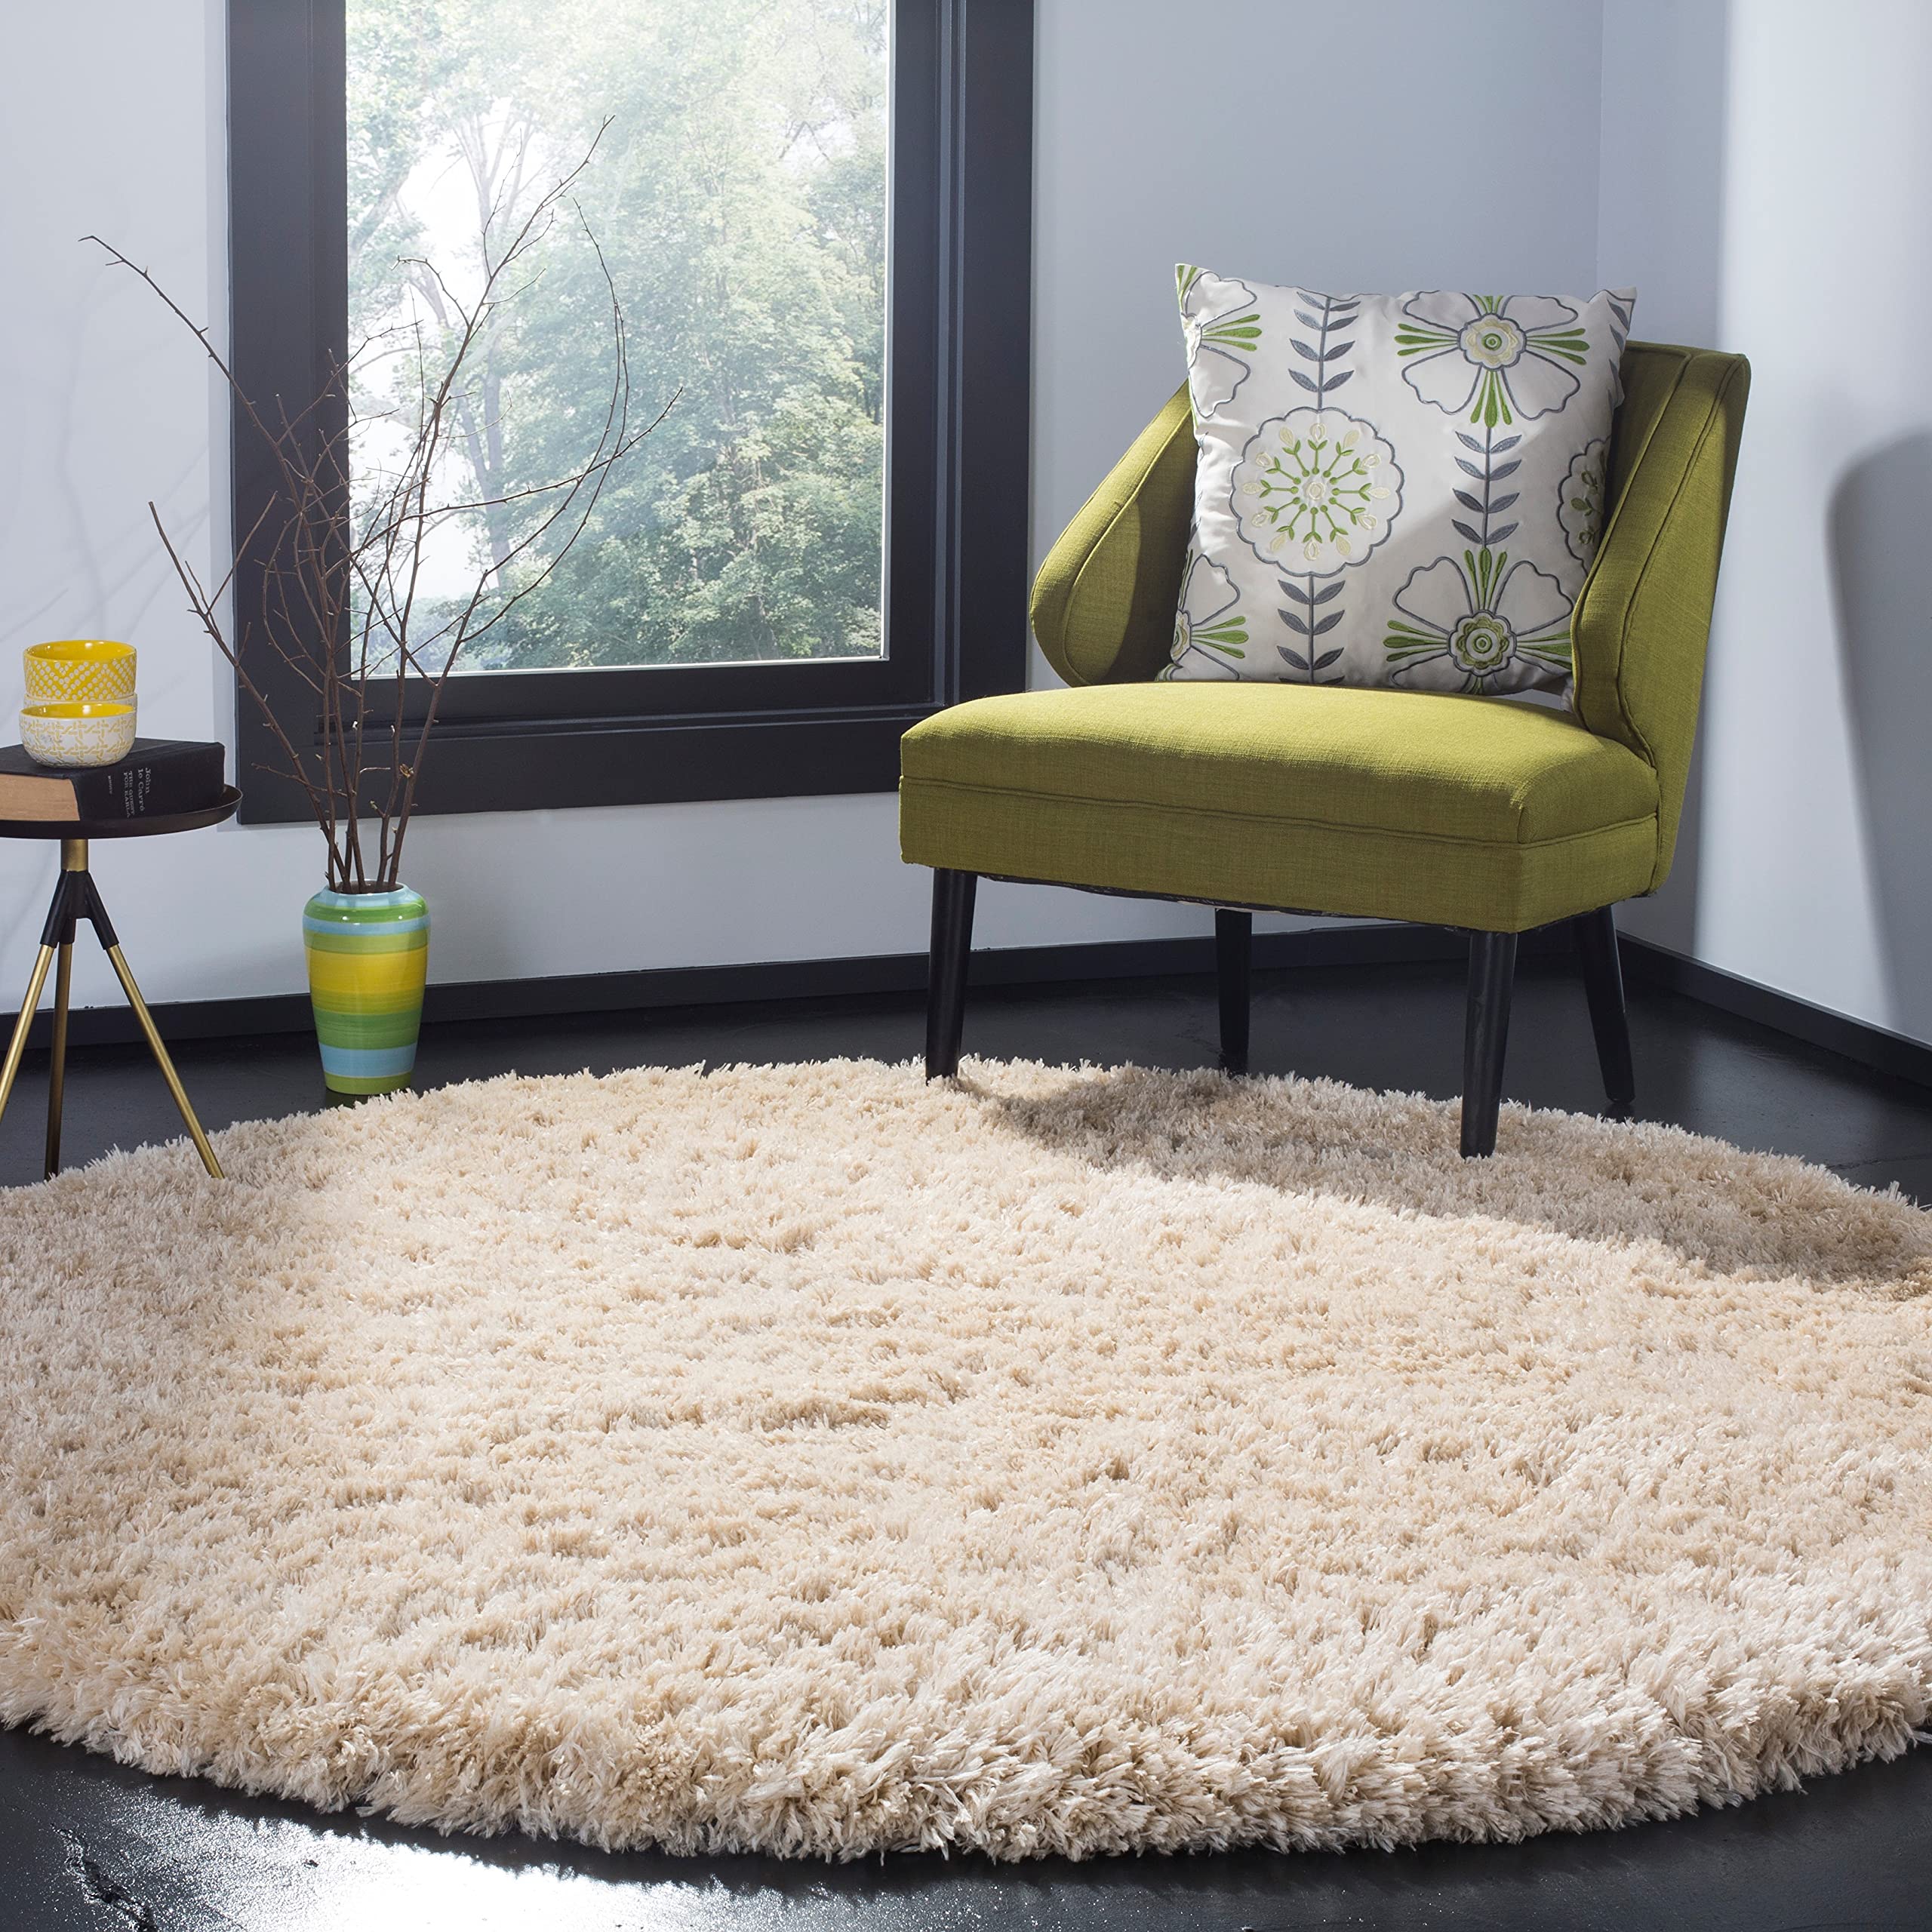 Safavieh Polar Shag Collection Area Rug - 4' Round, Light Beige, Solid Glam Design, Non-Shedding & Easy Care, 3-inch Thick Ideal for High Traffic Areas in Living Room, Bedroom (PSG800A)